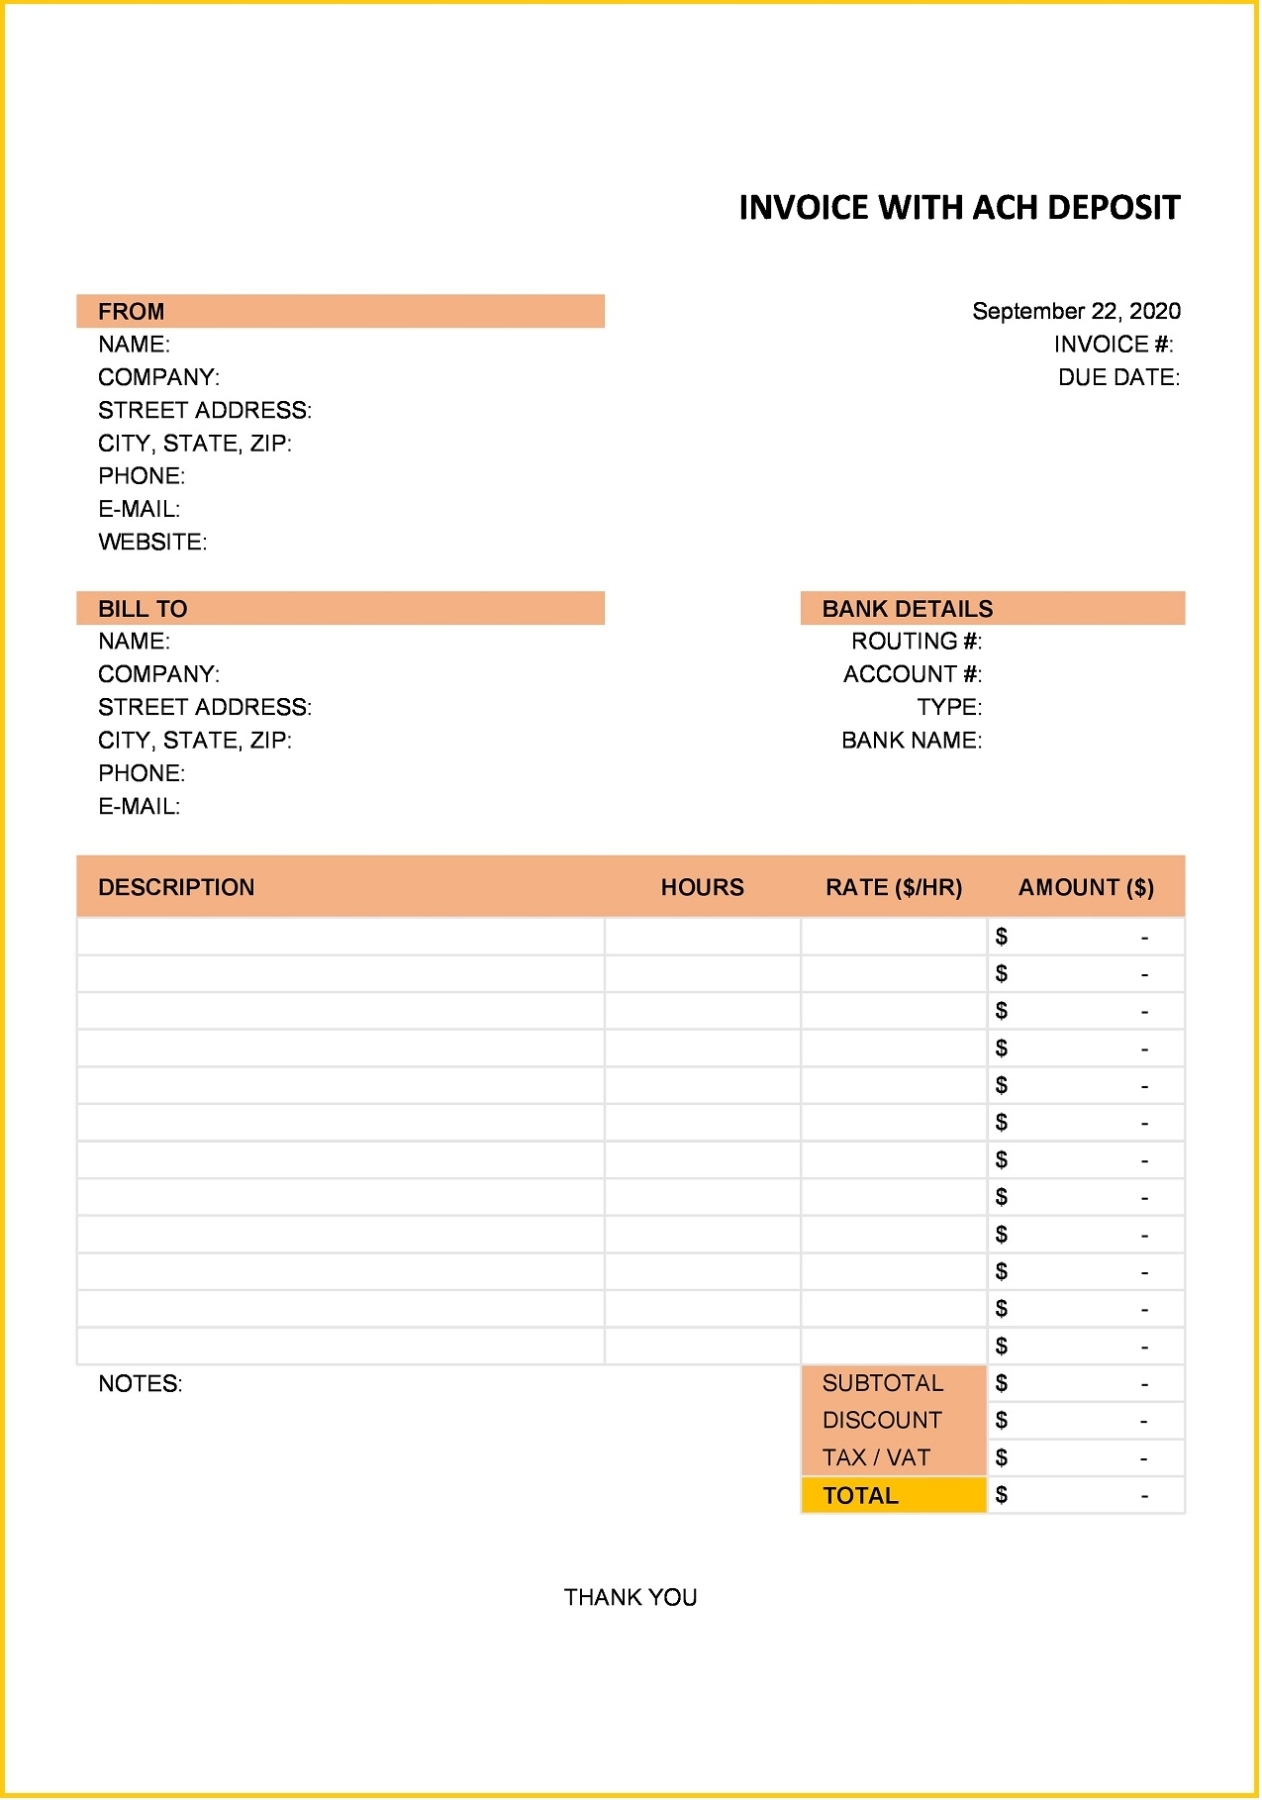 Bank Details Invoice Template Sample (Ach) | Geneevarojr within Invoice Checklist Template